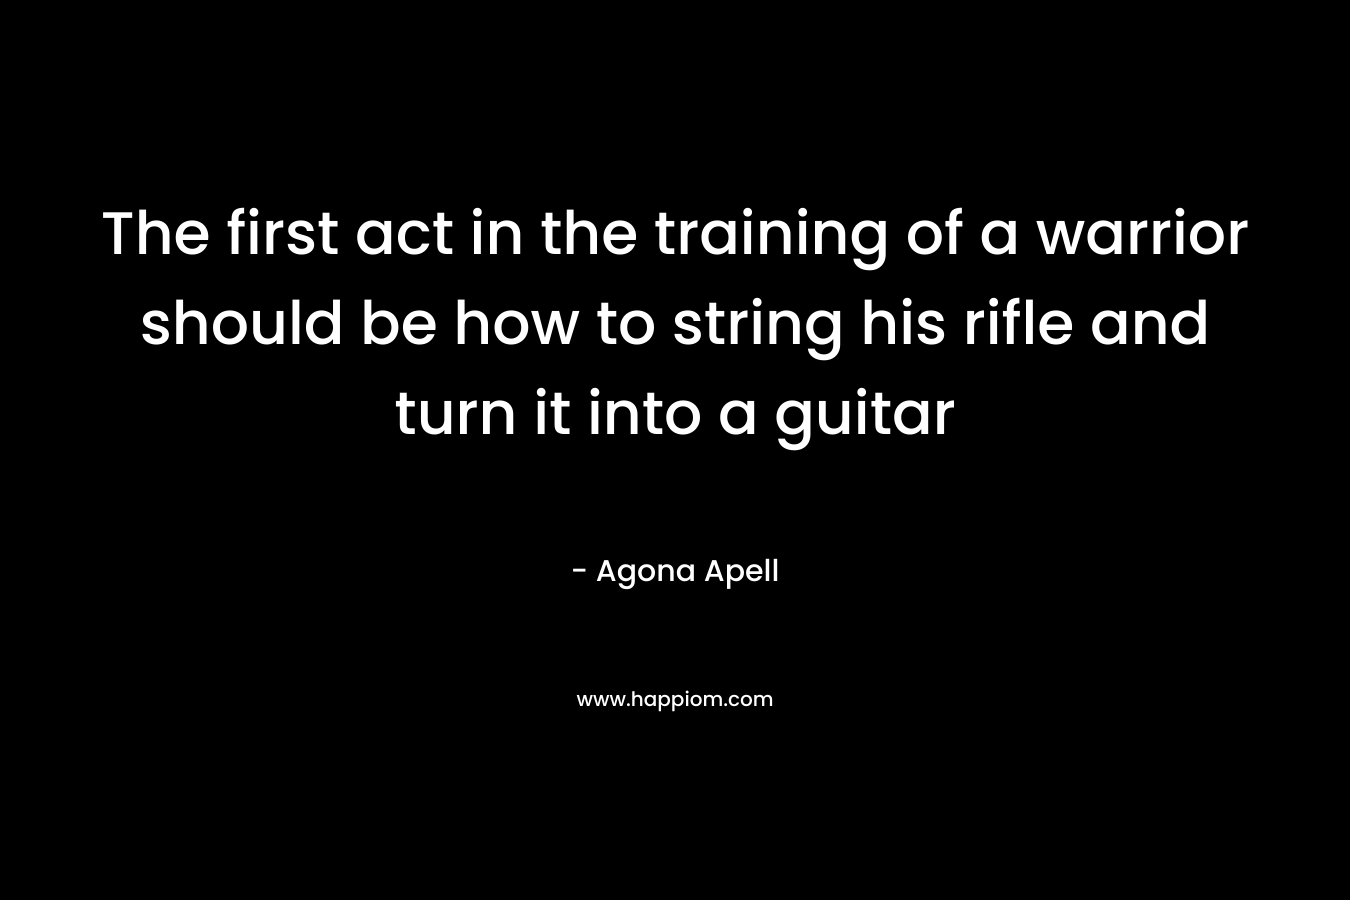 The first act in the training of a warrior should be how to string his rifle and turn it into a guitar – Agona Apell